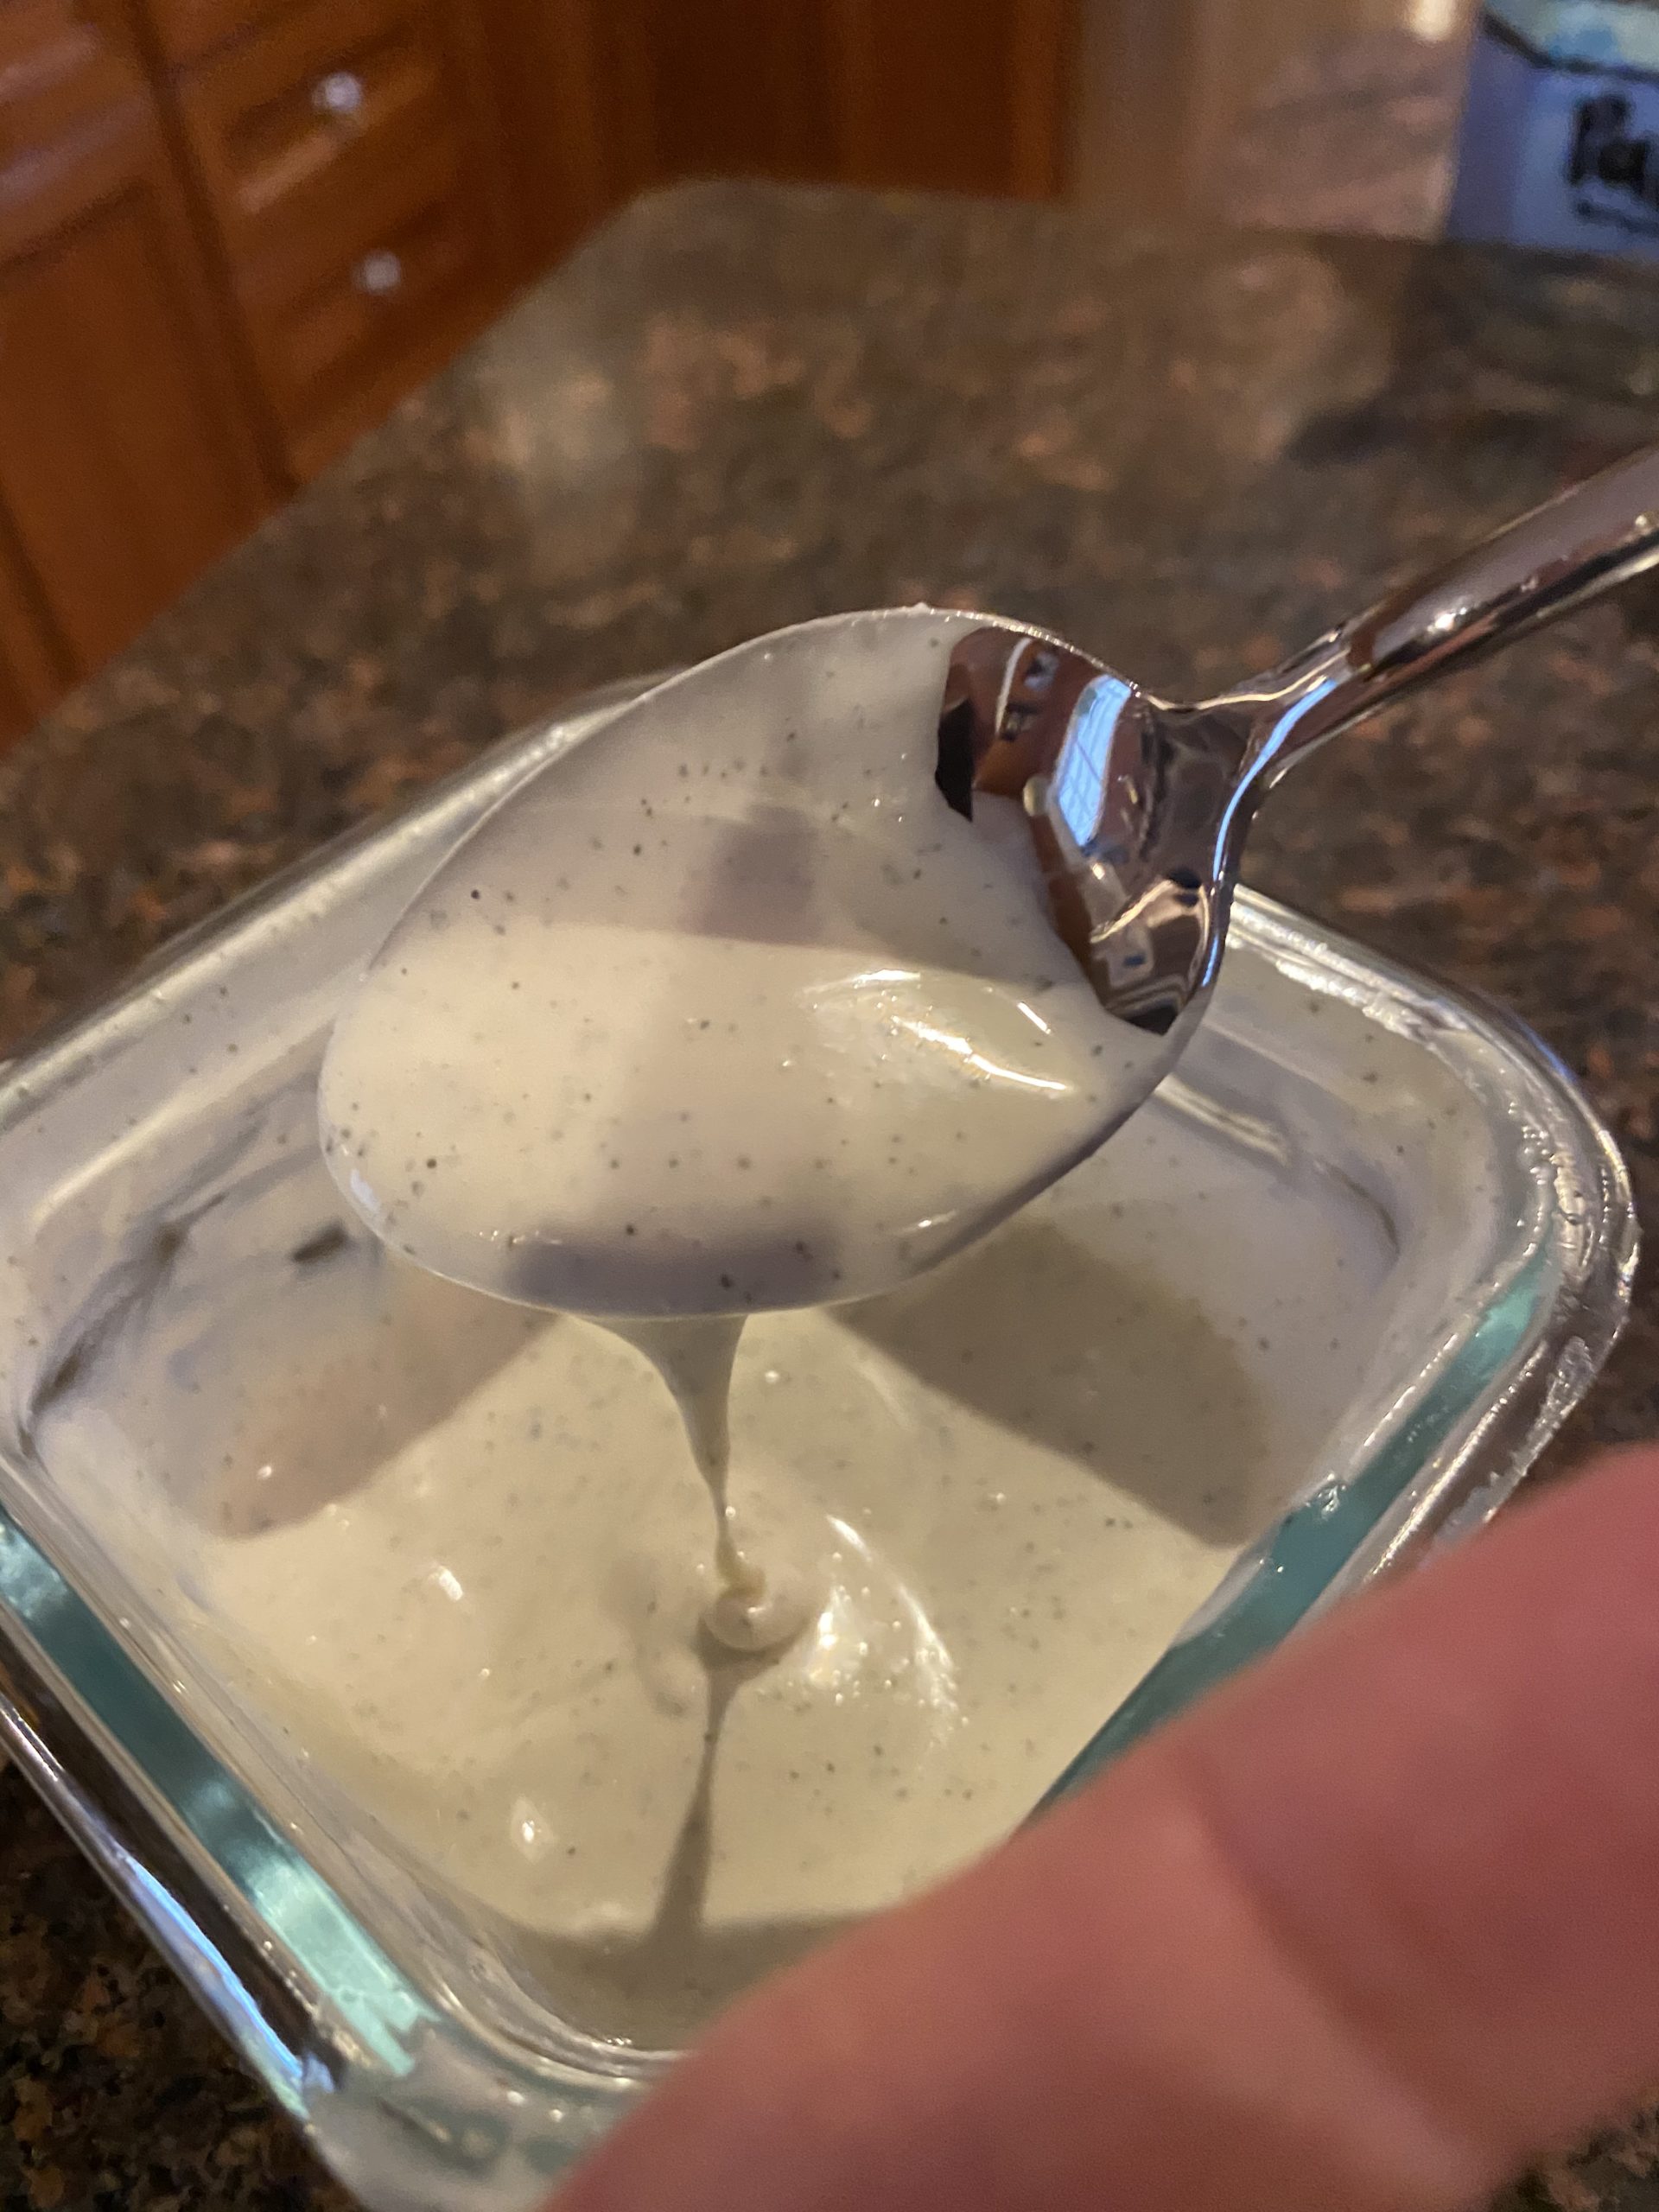 Dairy Free Ranch Dressing